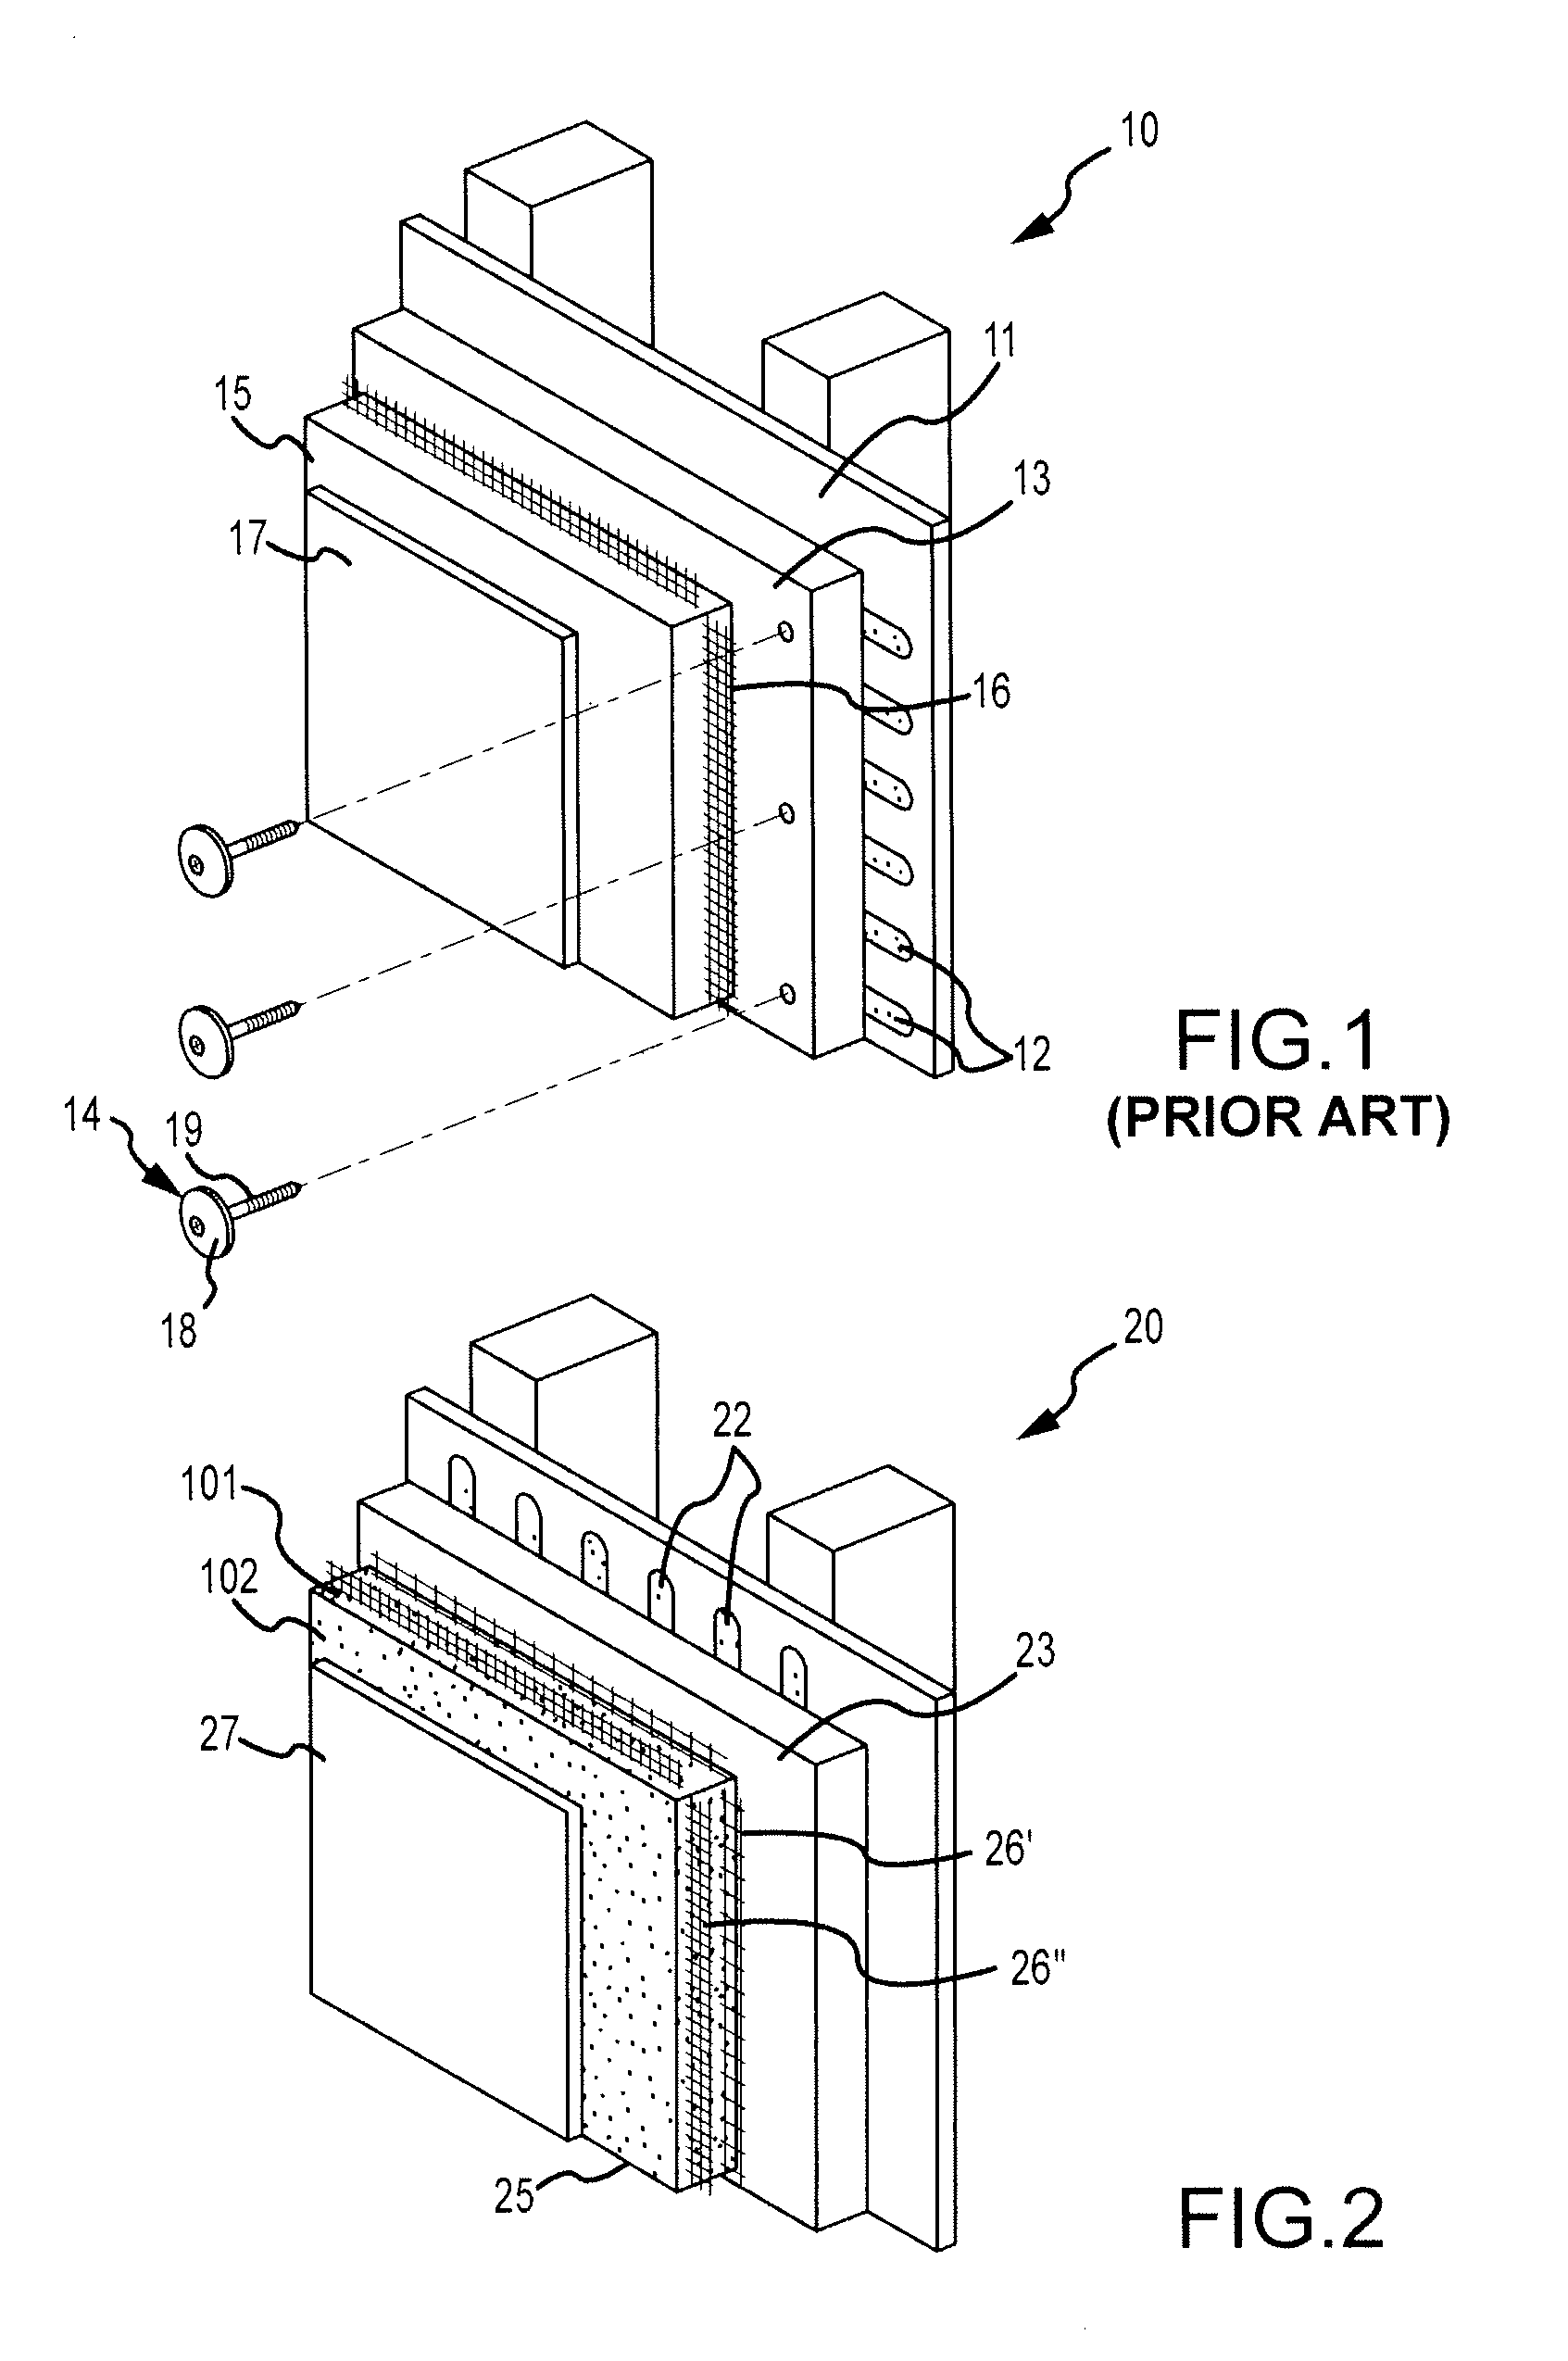 Eifs structures, methods of manufacturing and compositions for use in eifs cladding for reducing bird-related exterior wall damage